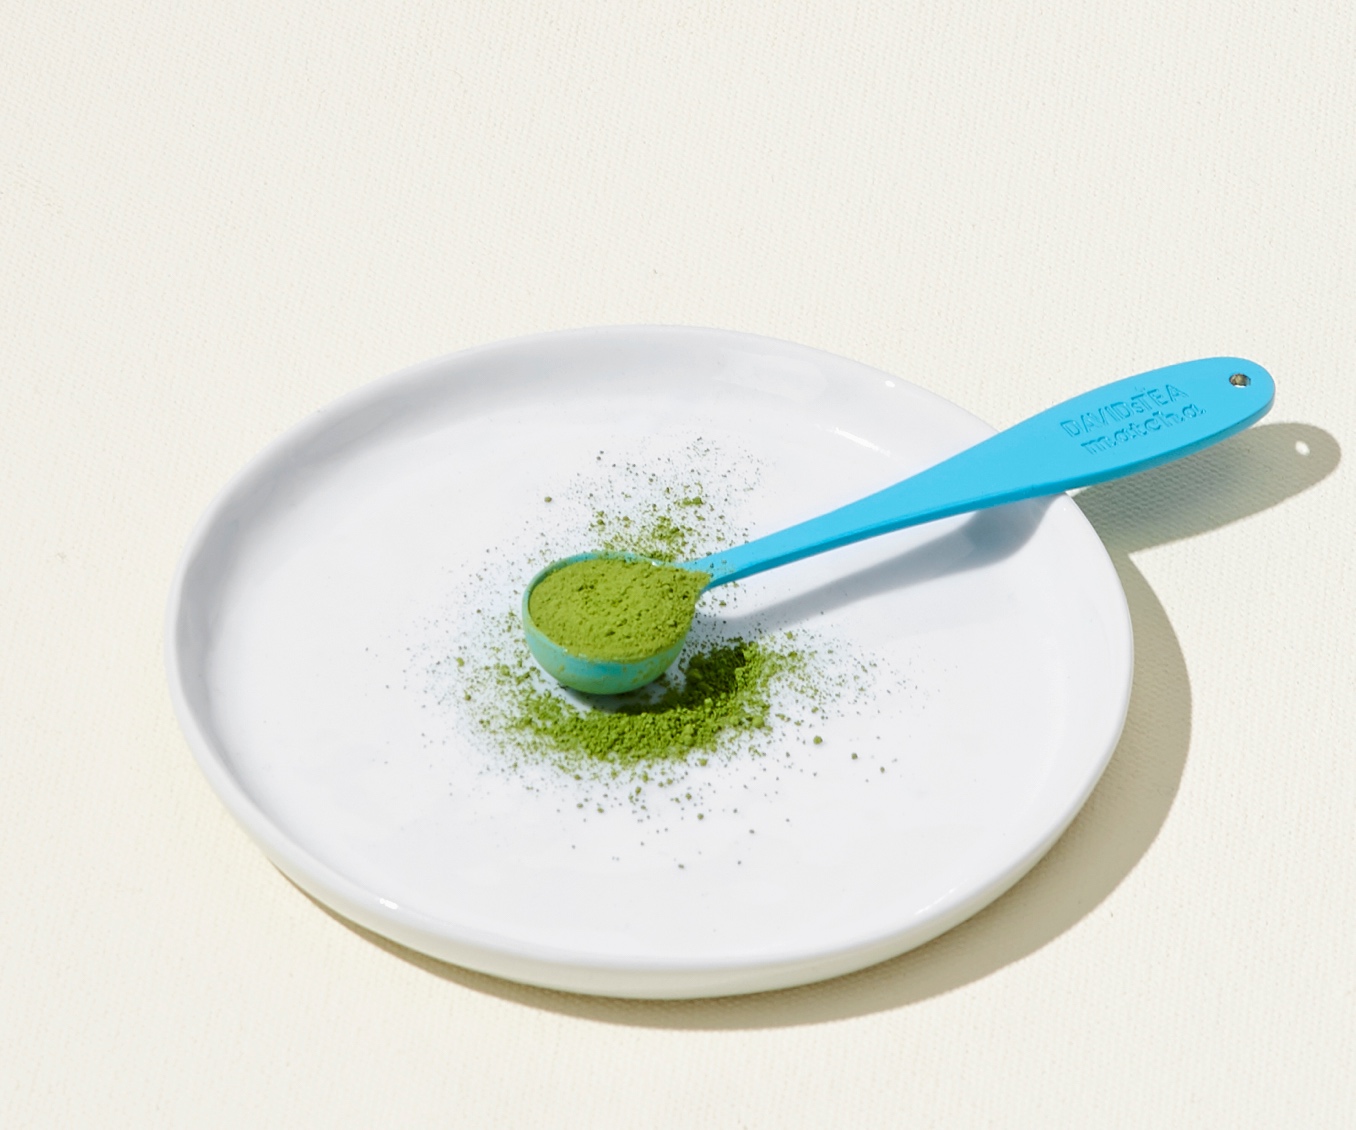 A perfect spoon filled with matcha powder.